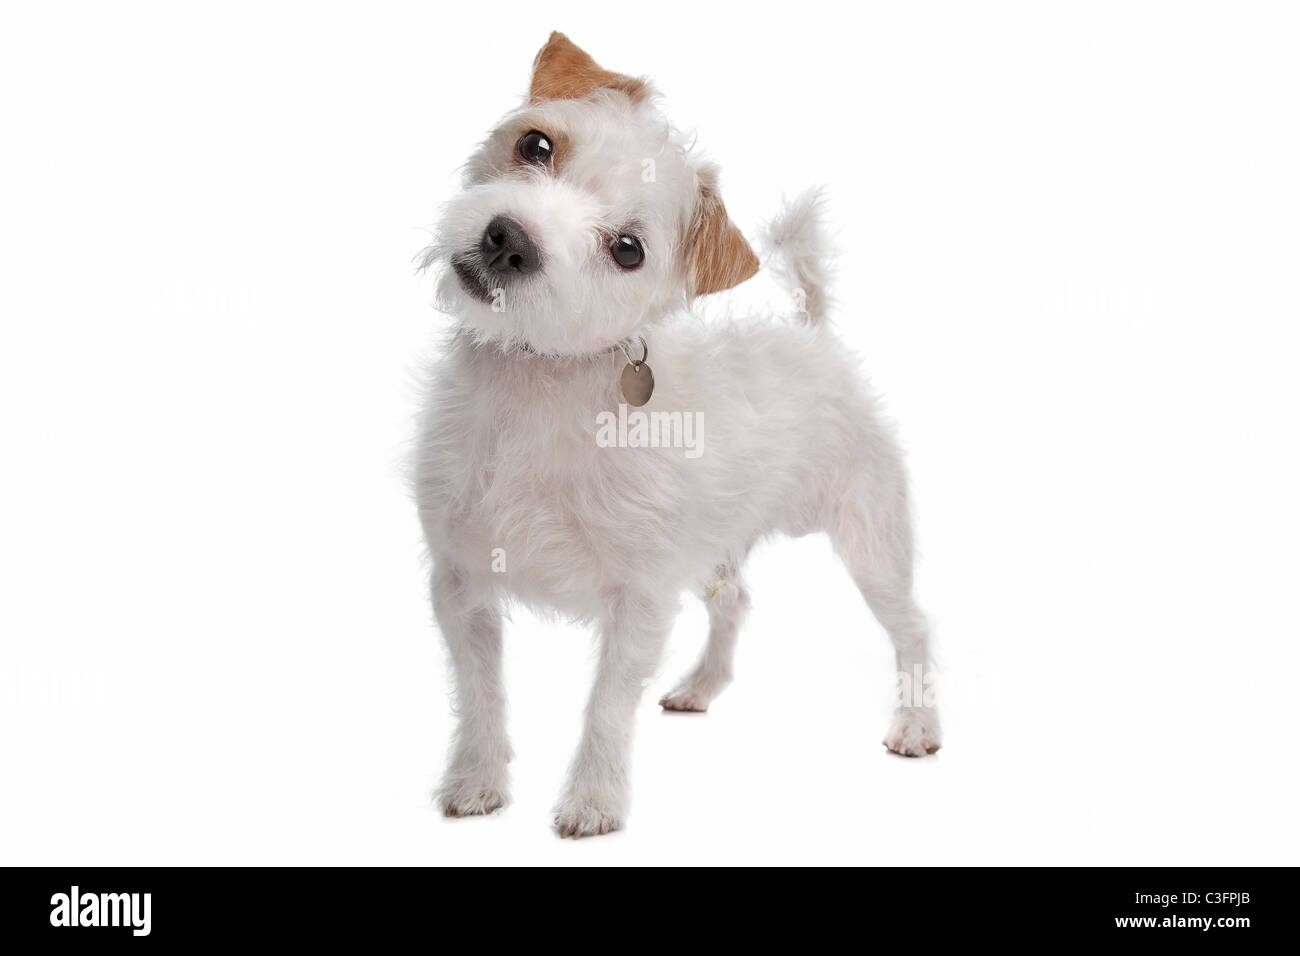 Jack Russel Terrier dog in front of a white background Stock Photo